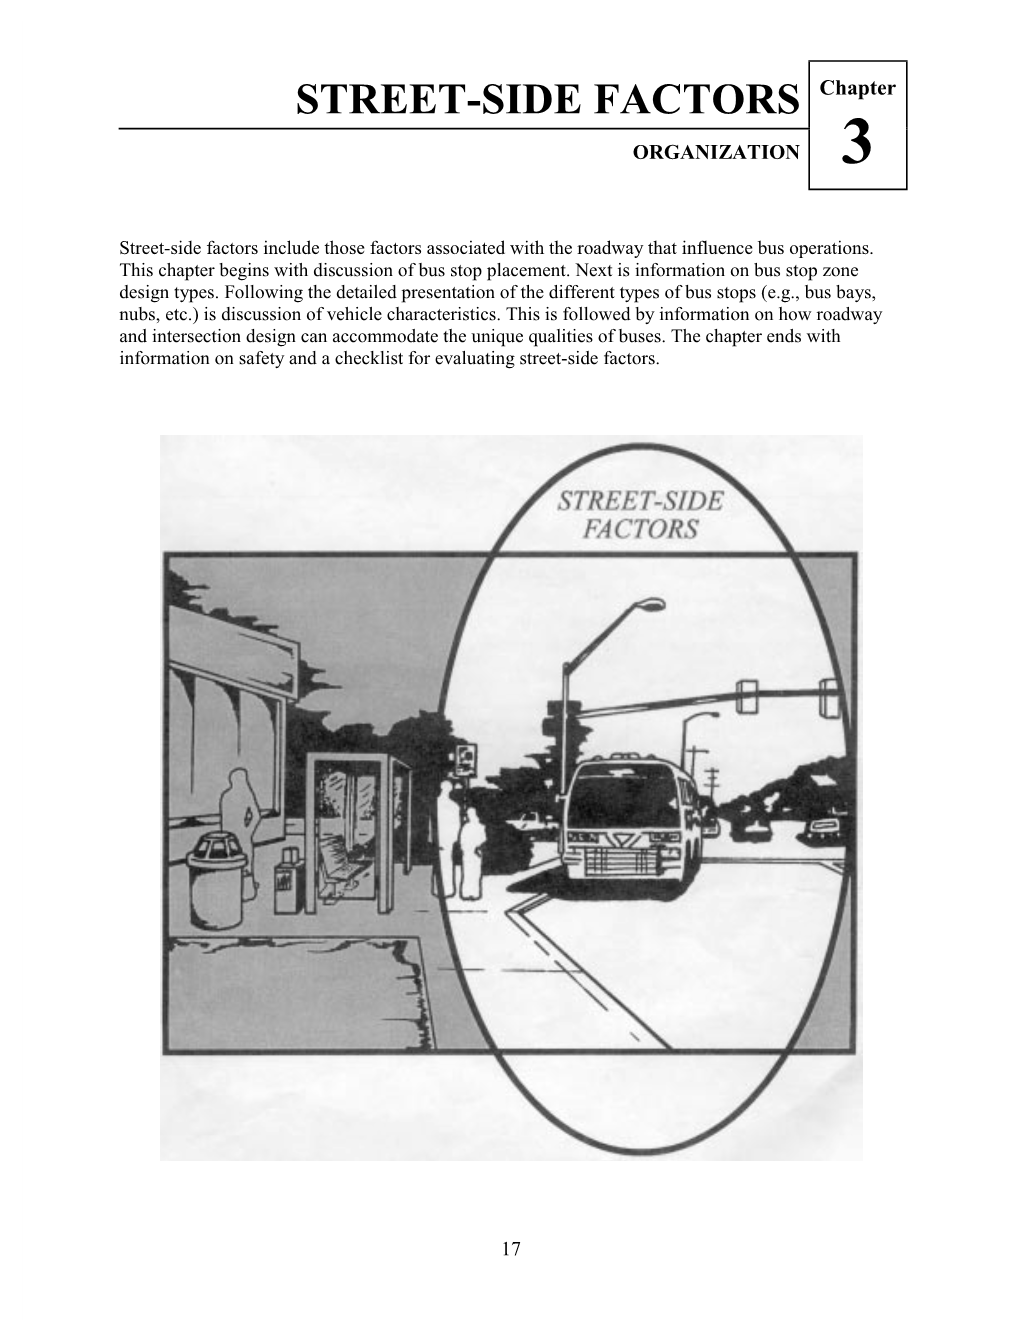 TCRP Report 19: Guidelines for the Location and Design of Bus Stops